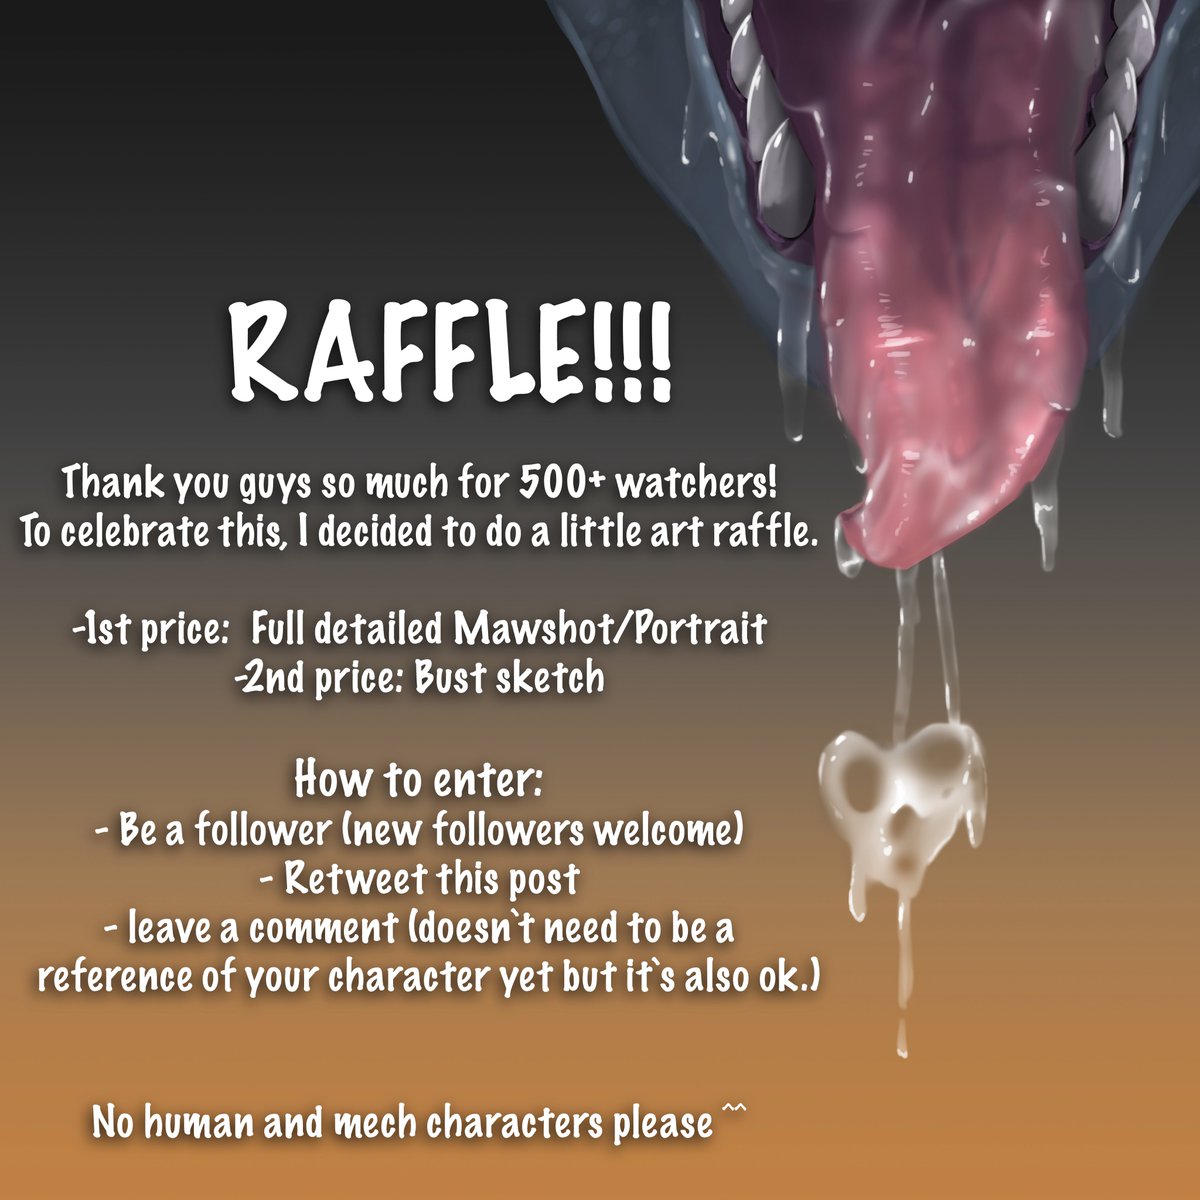 ⭐️ART RAFFLE!⭐️ Thank you for more than 500 followers, this means so much to me! <3 <3 <3 Can´t wait to bring you more maws and other art this year. :) How to enter: - Be a follower - Retweet - leave a comment (Refs are ok but not necessary) Raffle ends on January 31st.